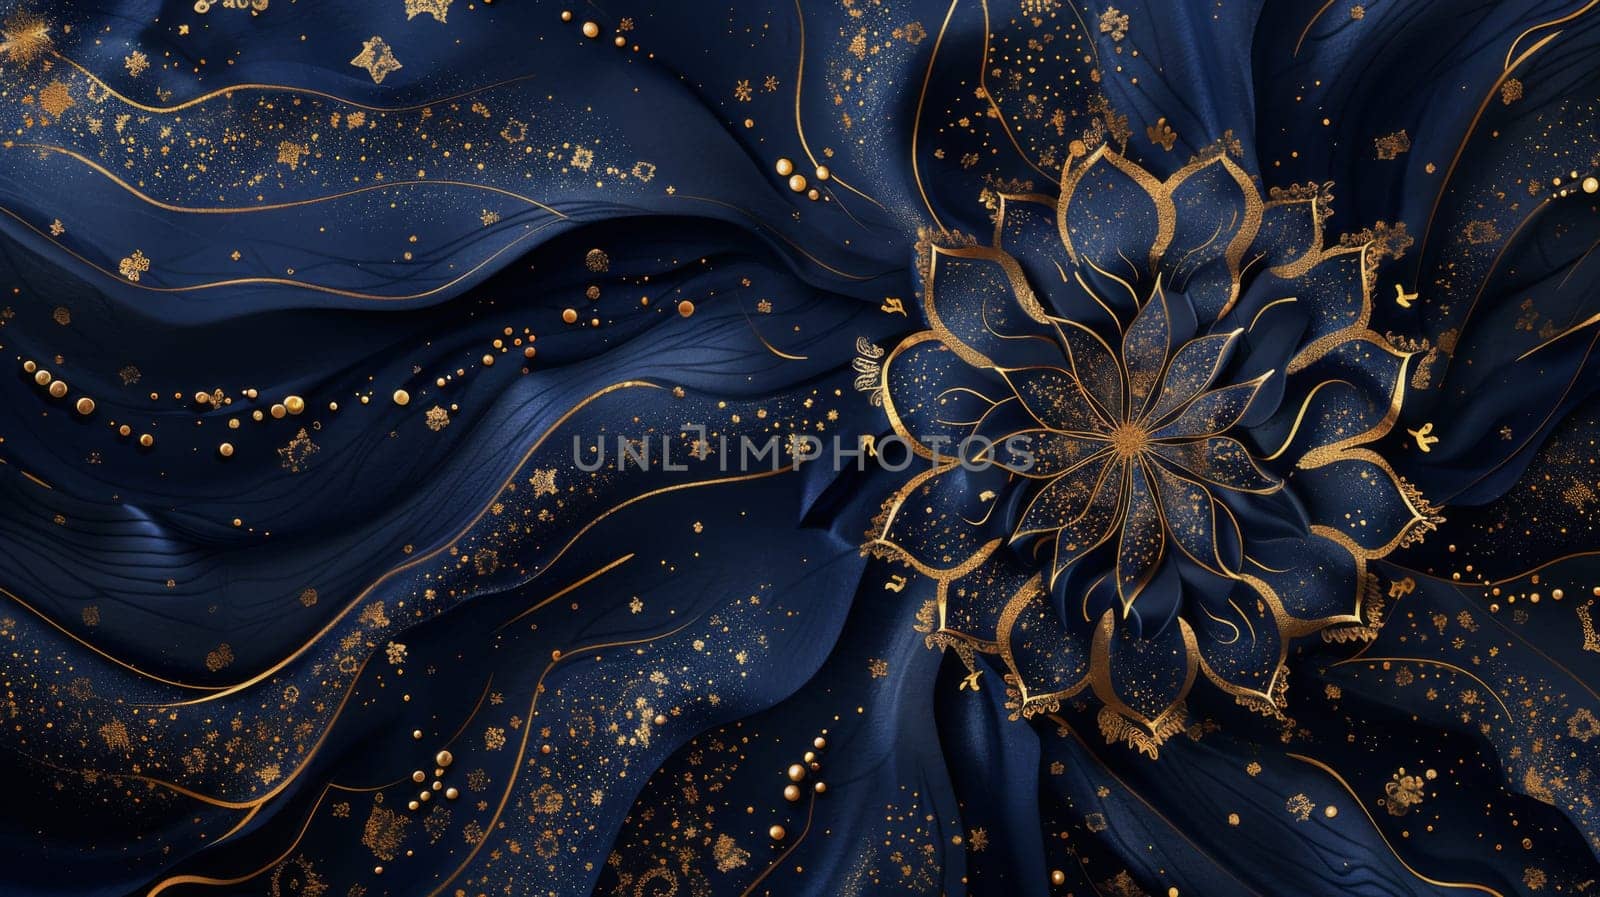 A close up of a blue flower with gold and black designs